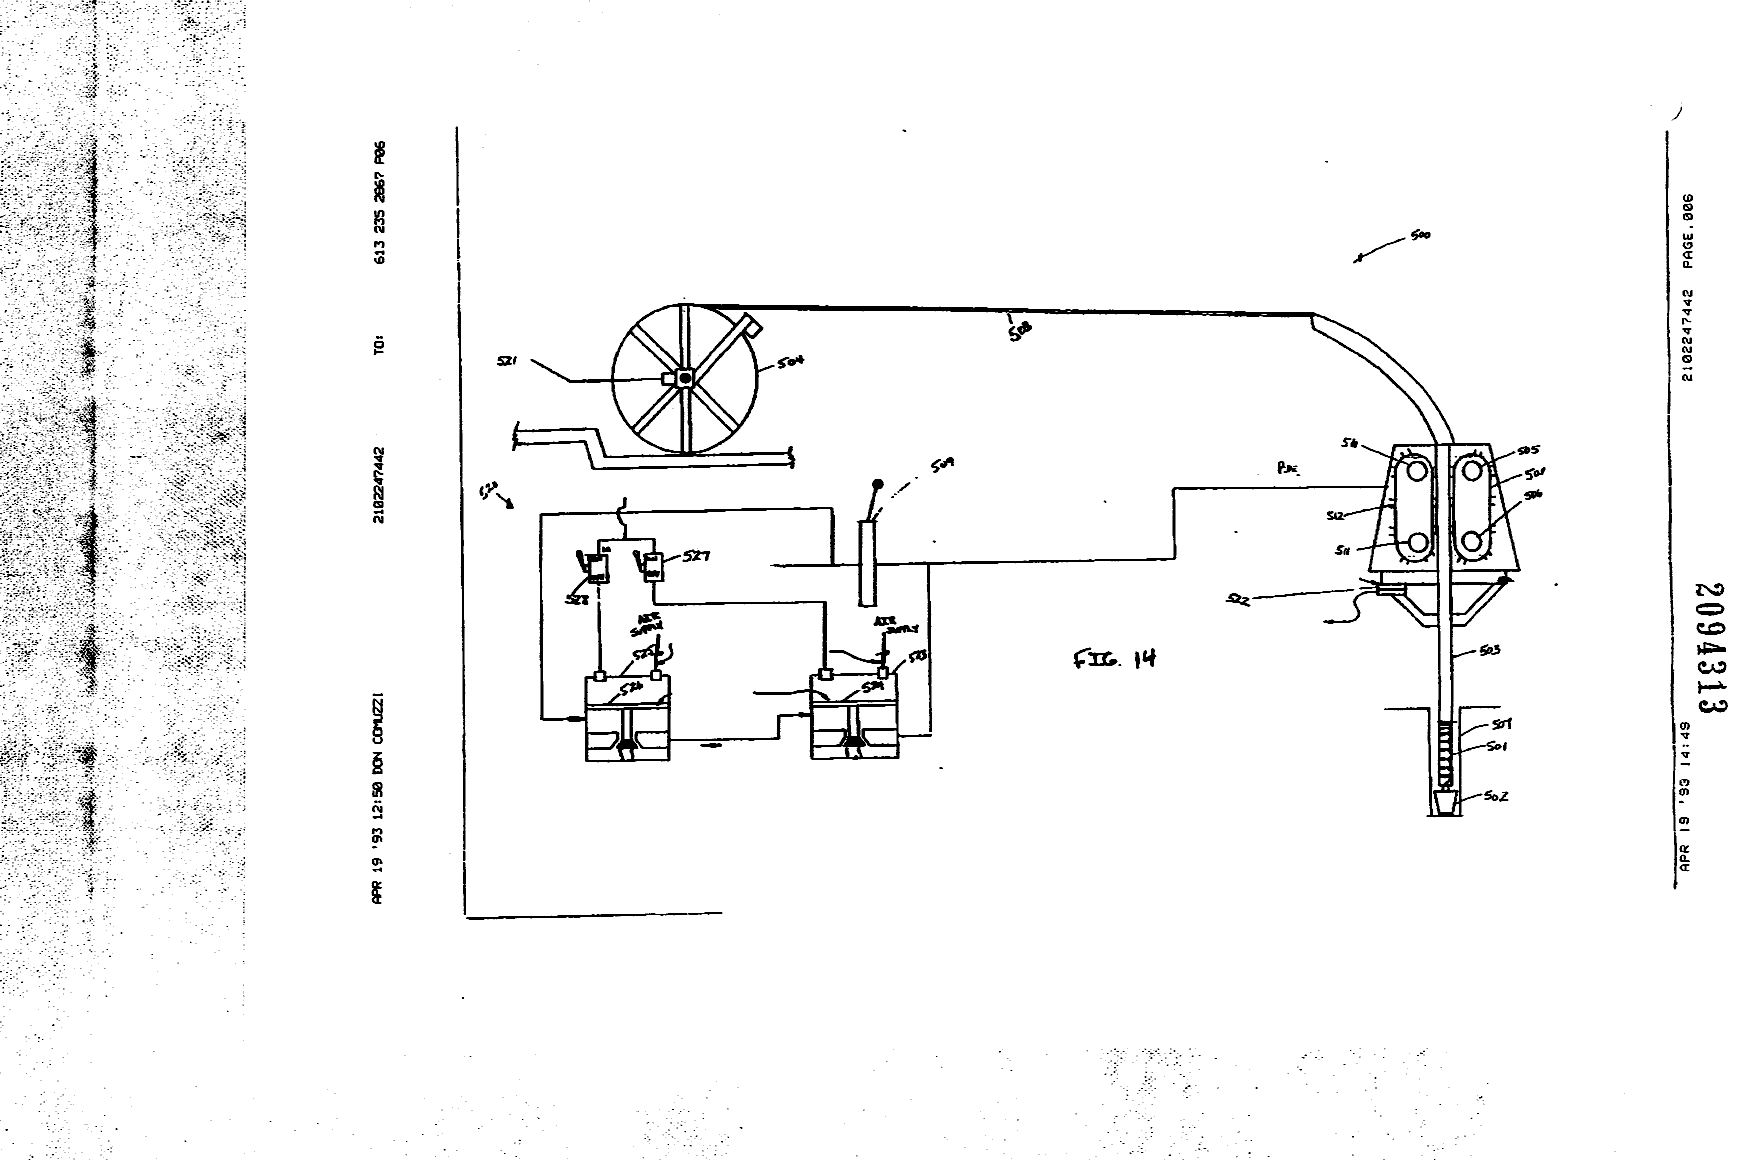 Canadian Patent Document 2094313. Drawings 19941209. Image 13 of 13